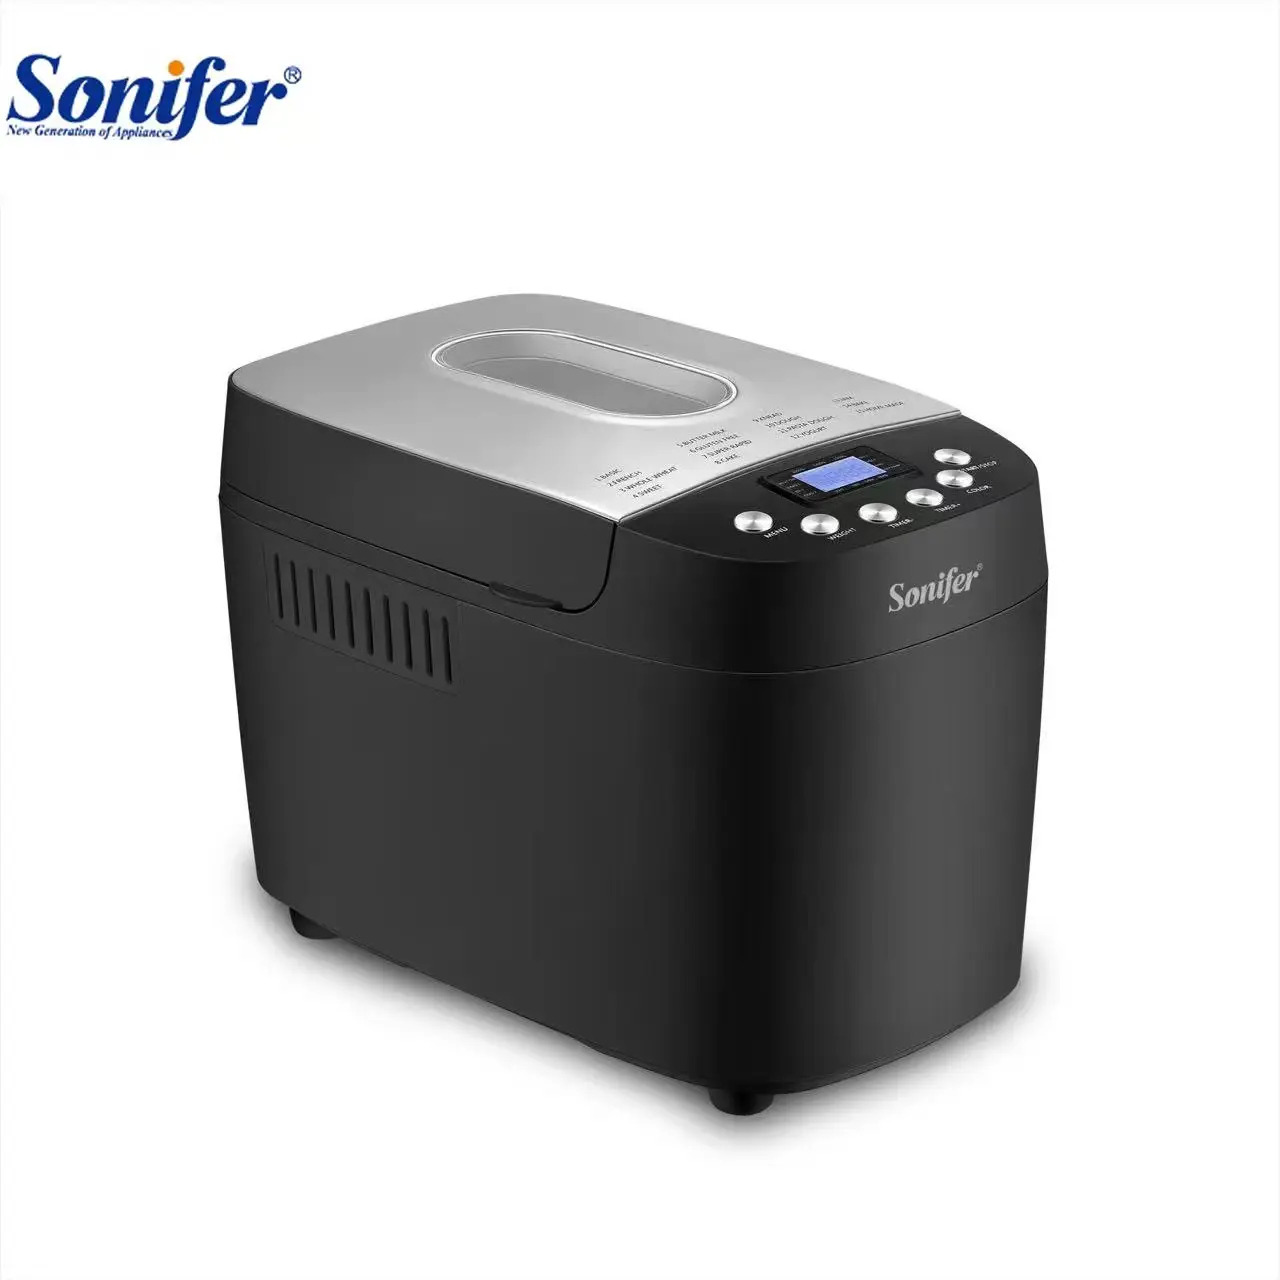 Sonifer SF-4025 new kitchen 15 programs digital electric automatic french bread maker machine for home